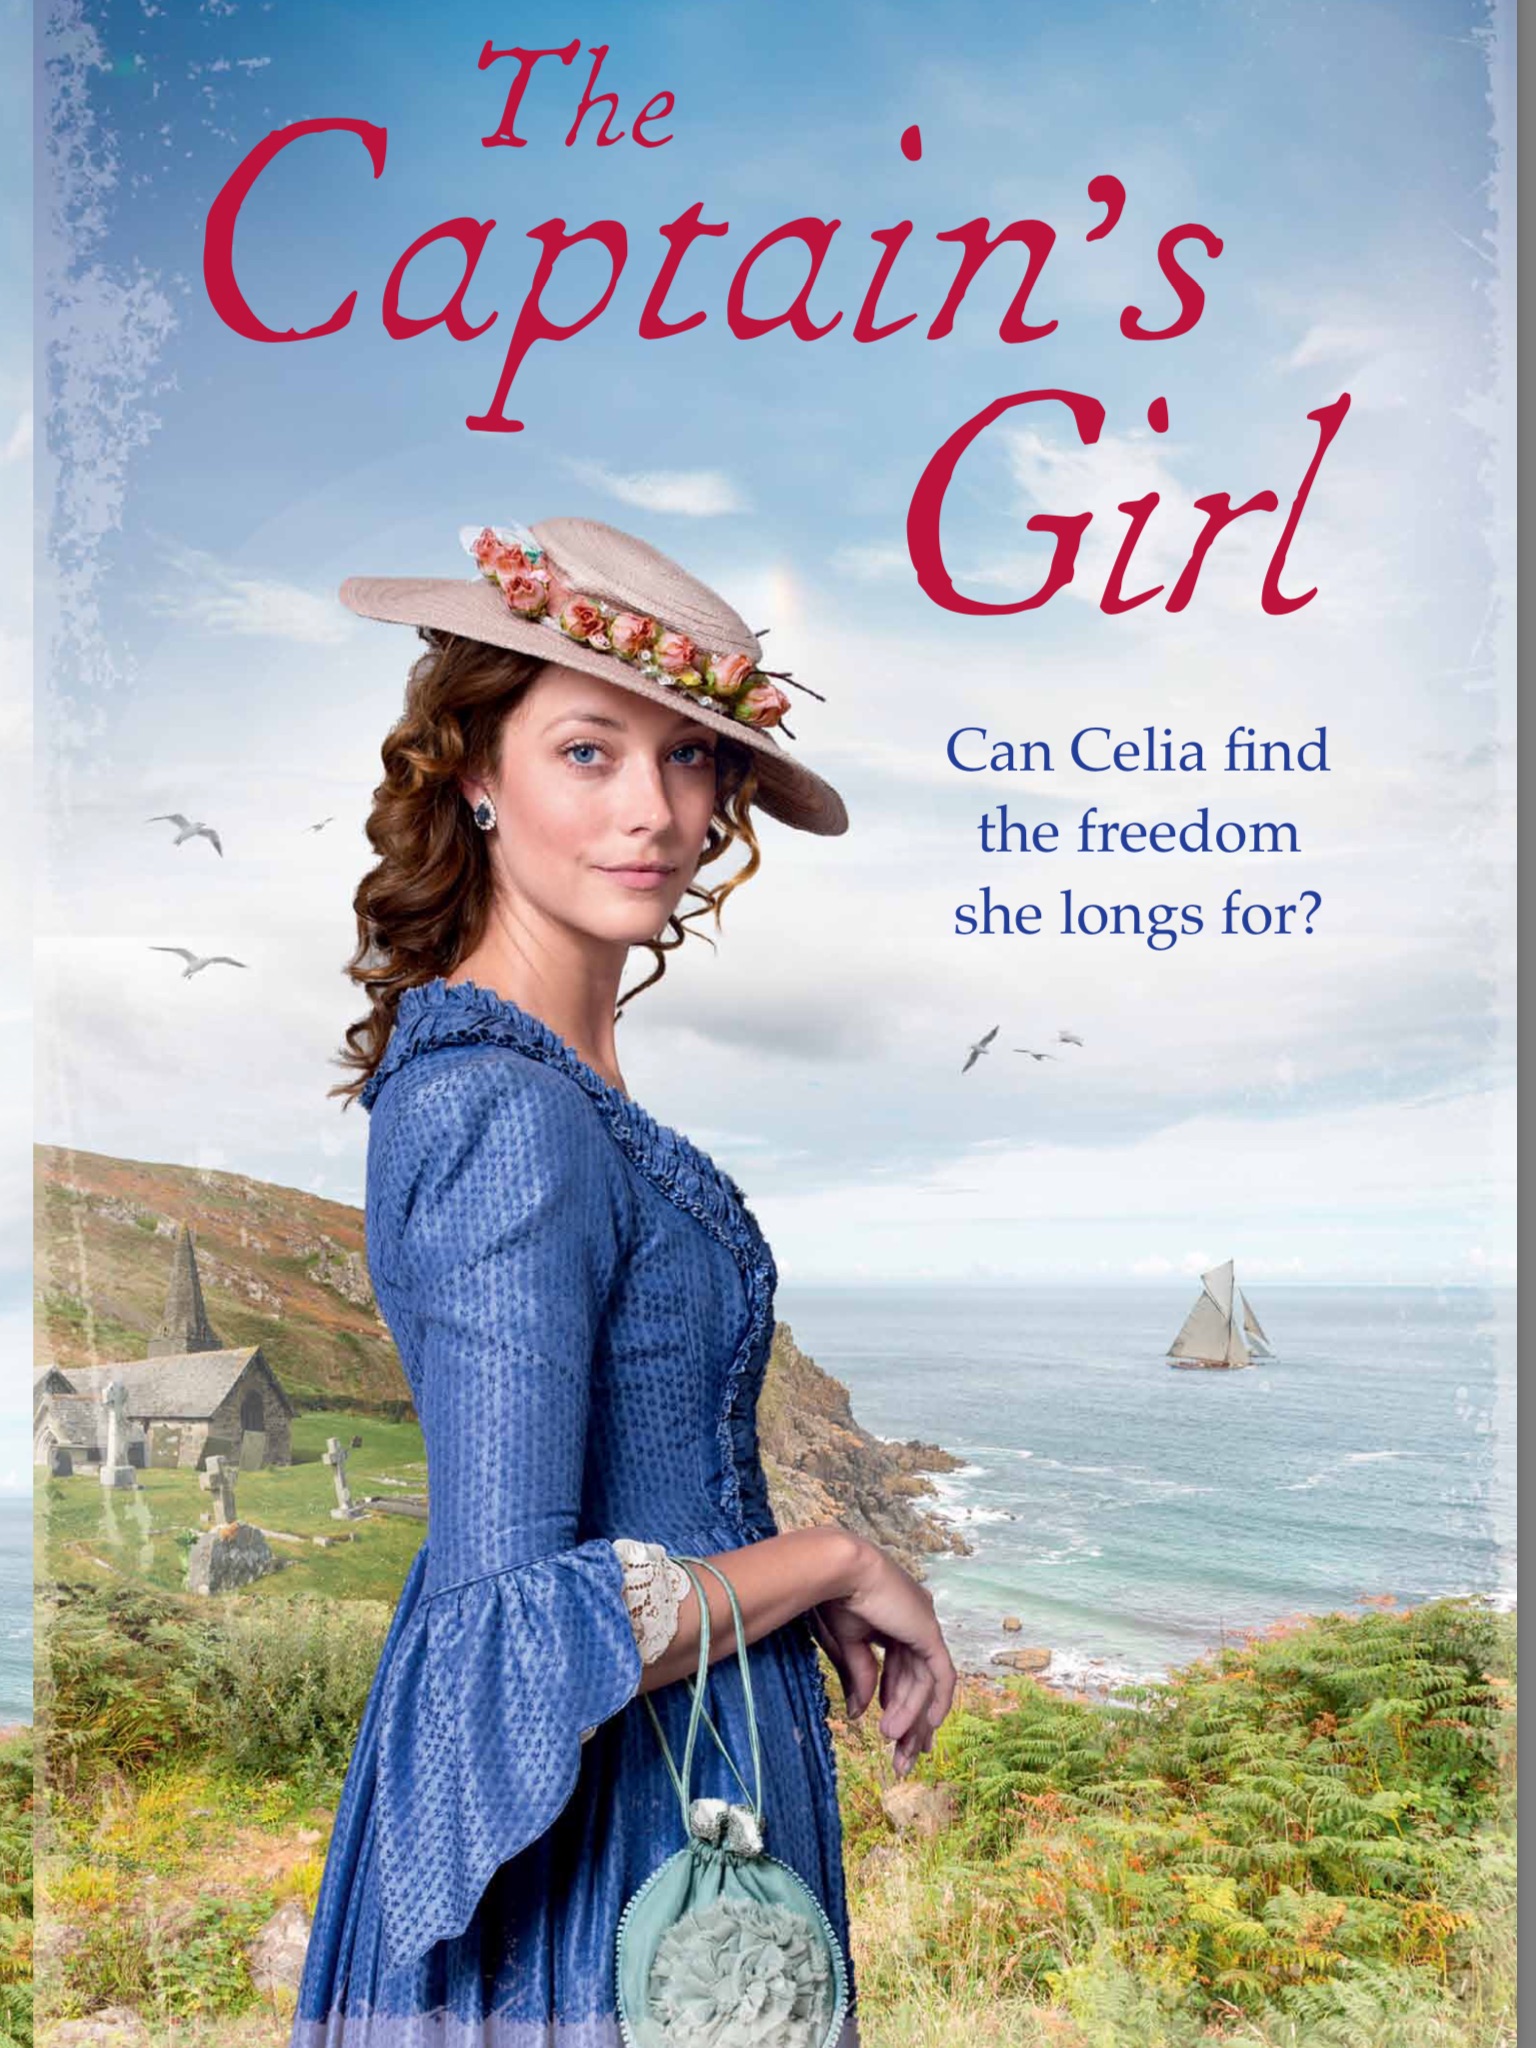 The Captains Girl by Nicola Pryce